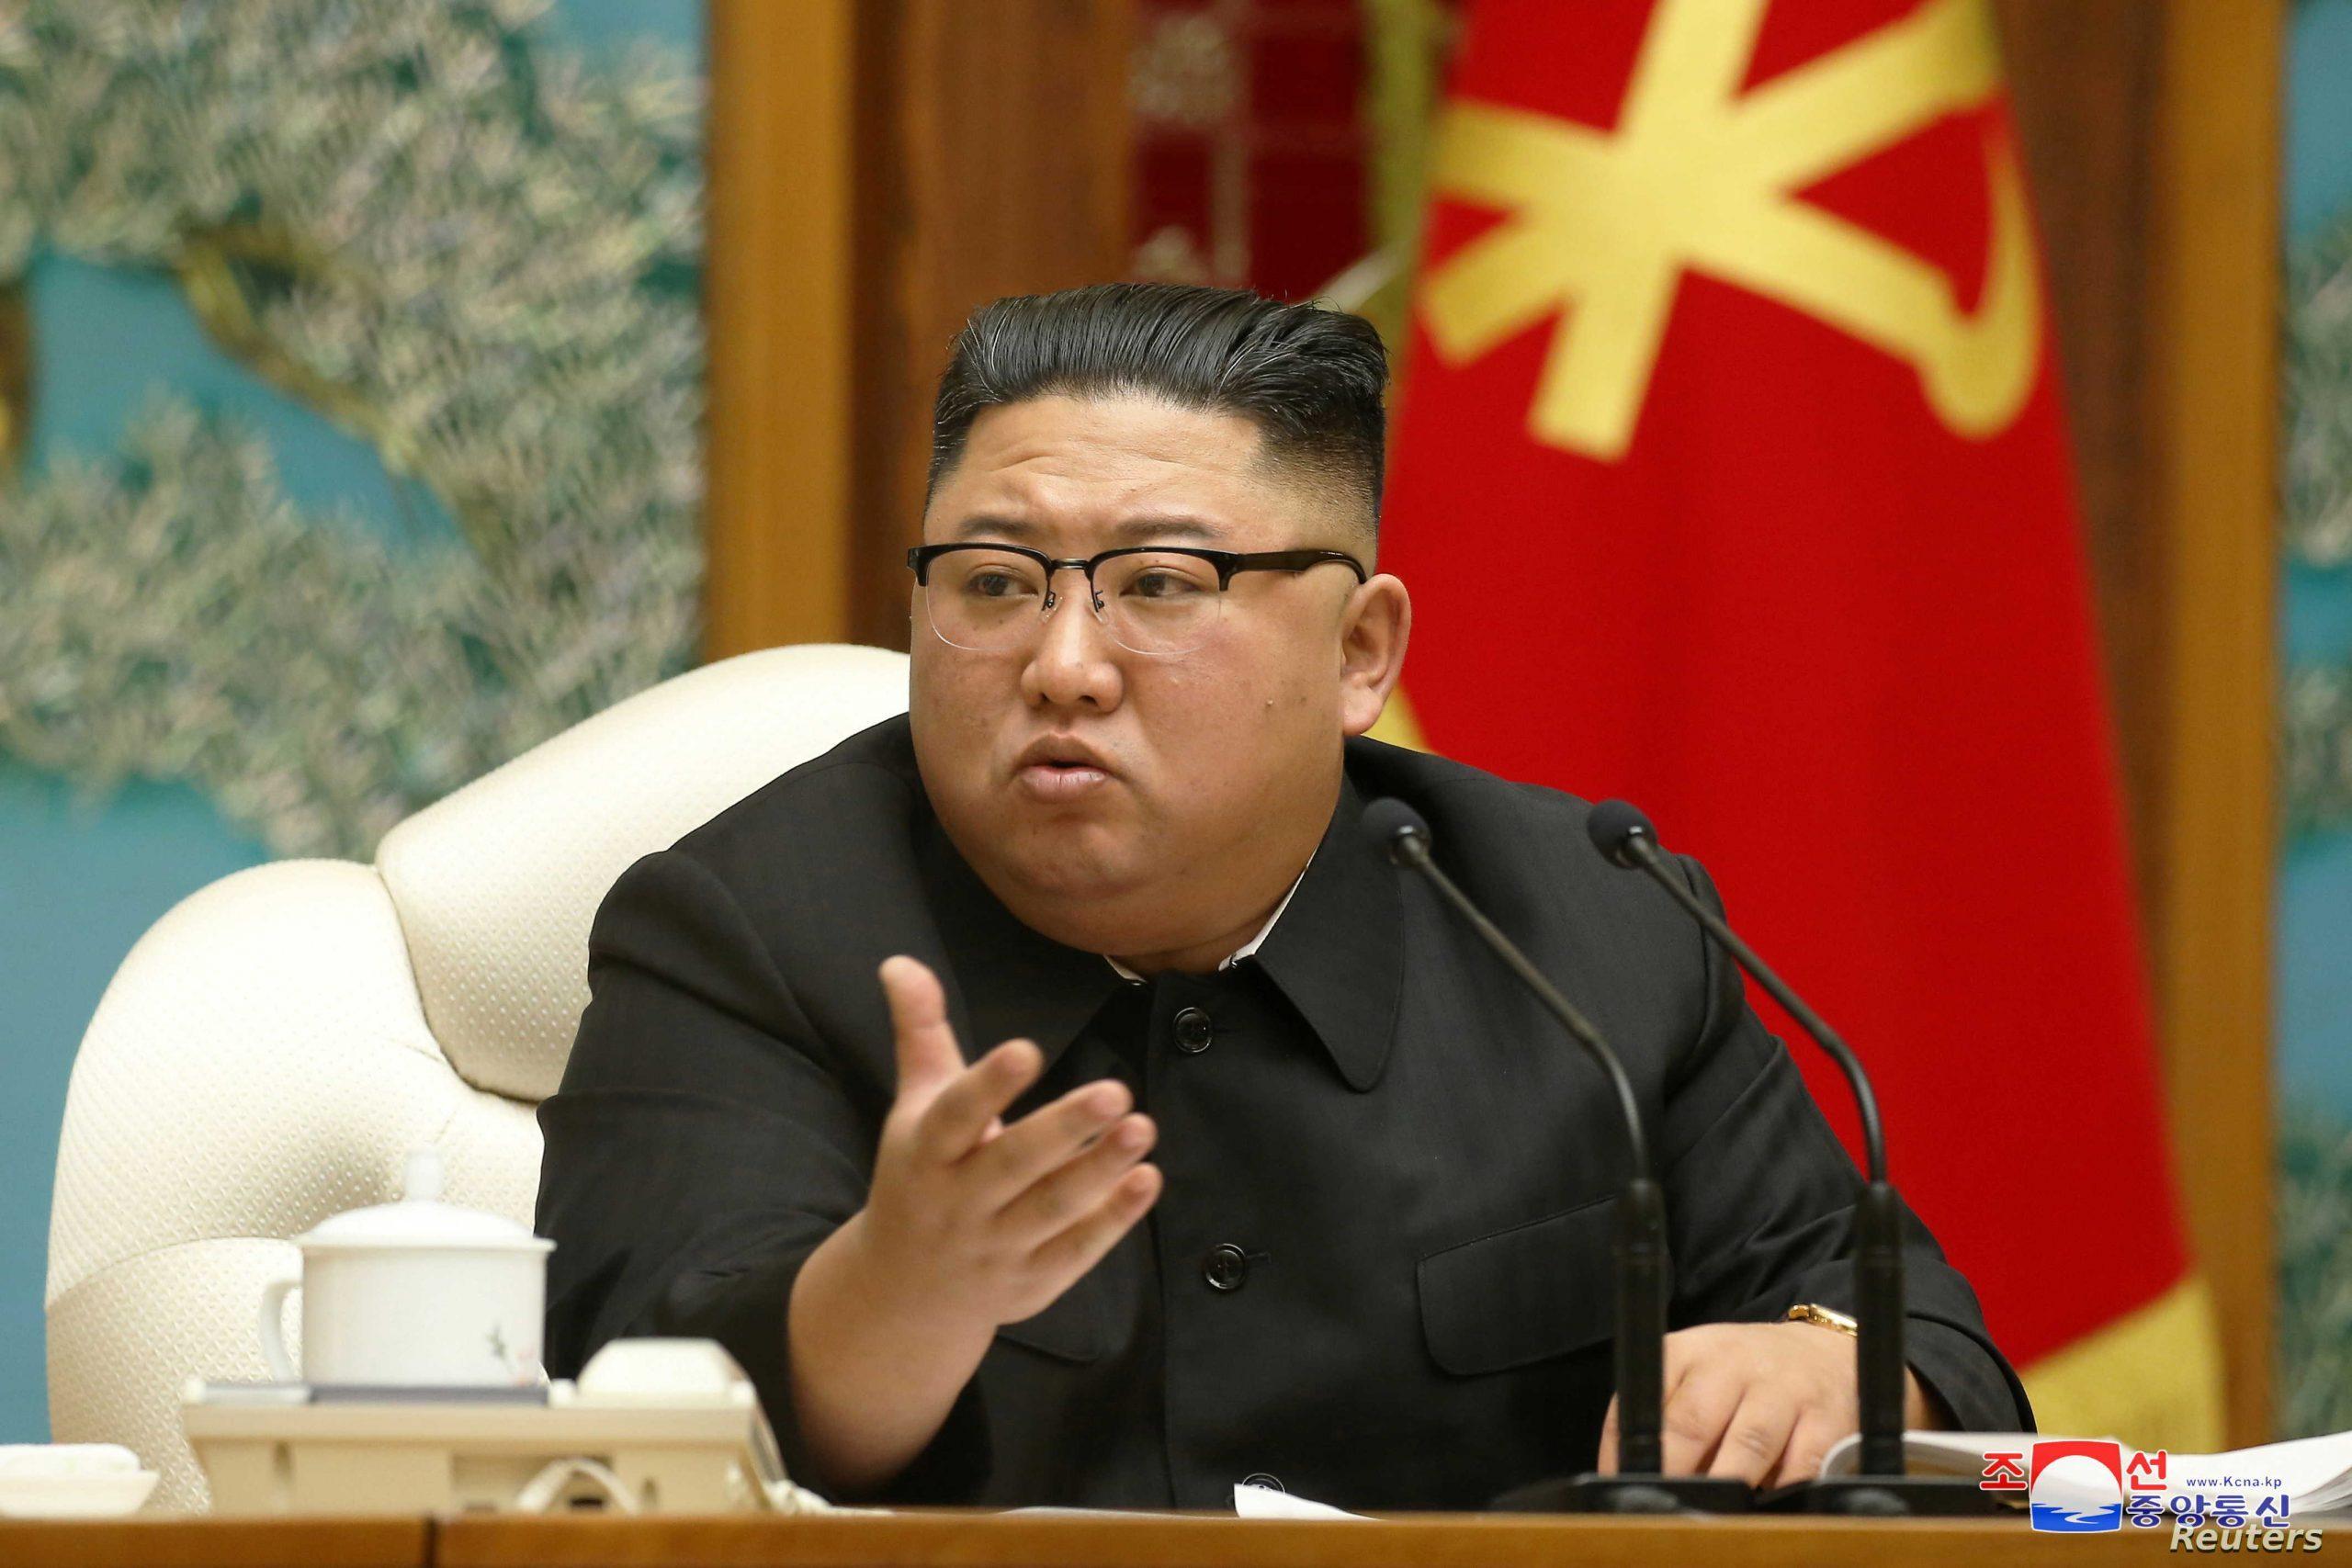 North Korean leader Kim Jong Un at the 20th Enlarged Meeting of the Political Bureau of the 7th Central Committee of the Workers' Party of Korea (WPK), in Pyongyang, North Korea, in this undated photo released on November 16, 2020 by North Korea's Korean Central News Agency (KCNA).       KCNA via REUTERS    ATTENTION EDITORS - THIS IMAGE WAS PROVIDED BY A THIRD PARTY. REUTERS IS UNABLE TO INDEPENDENTLY VERIFY THIS IMAGE. NO THIRD PARTY SALES. SOUTH KOREA OUT. NO COMMERCIAL OR EDITORIAL SALES IN SOUTH KOREA.